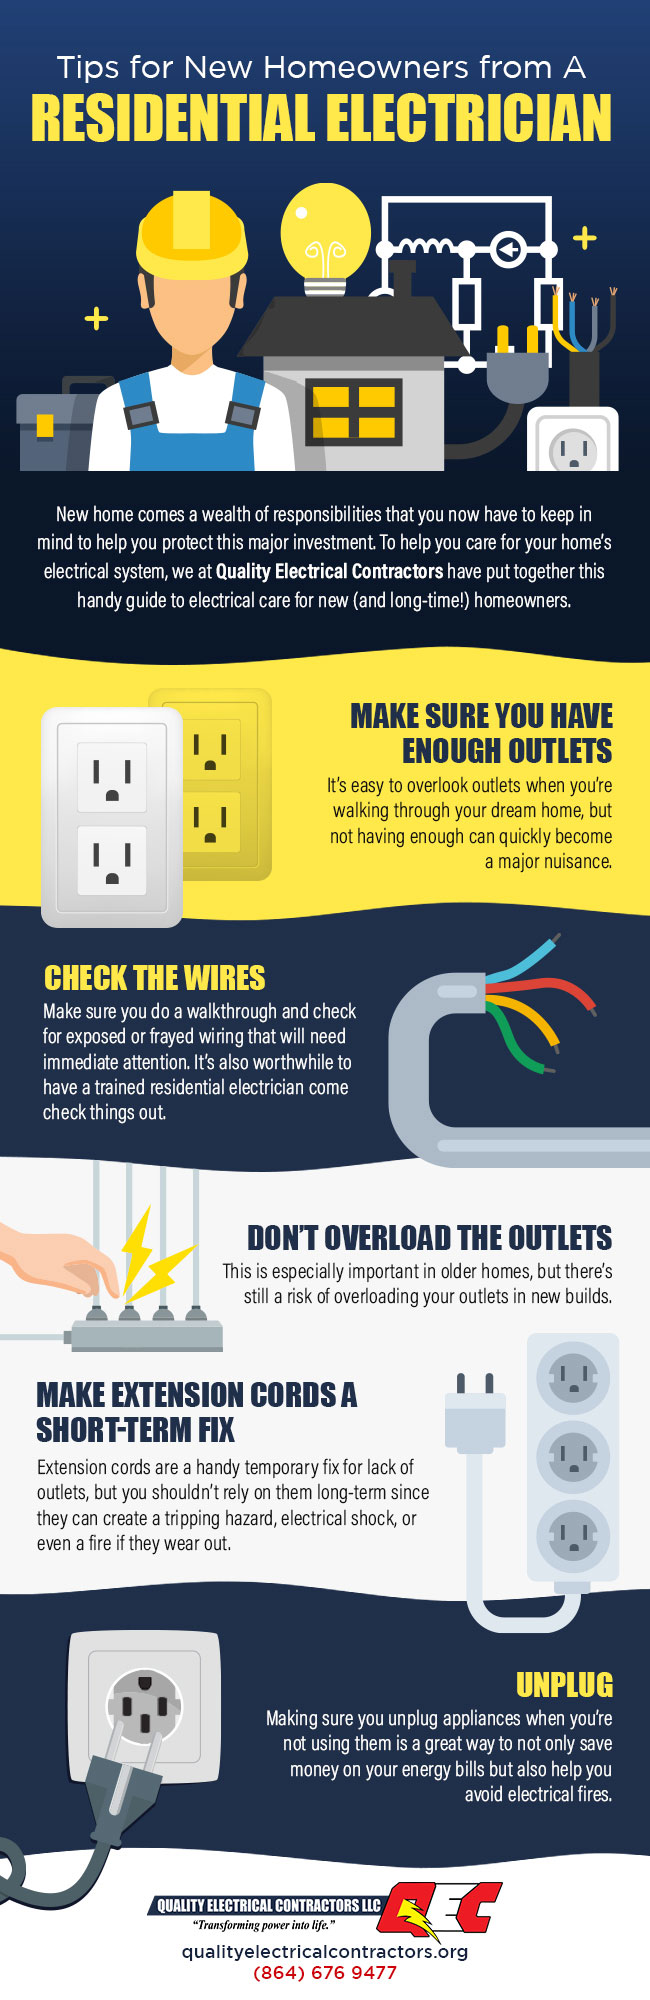 Tips for New Homeowners from A Residential Electrician